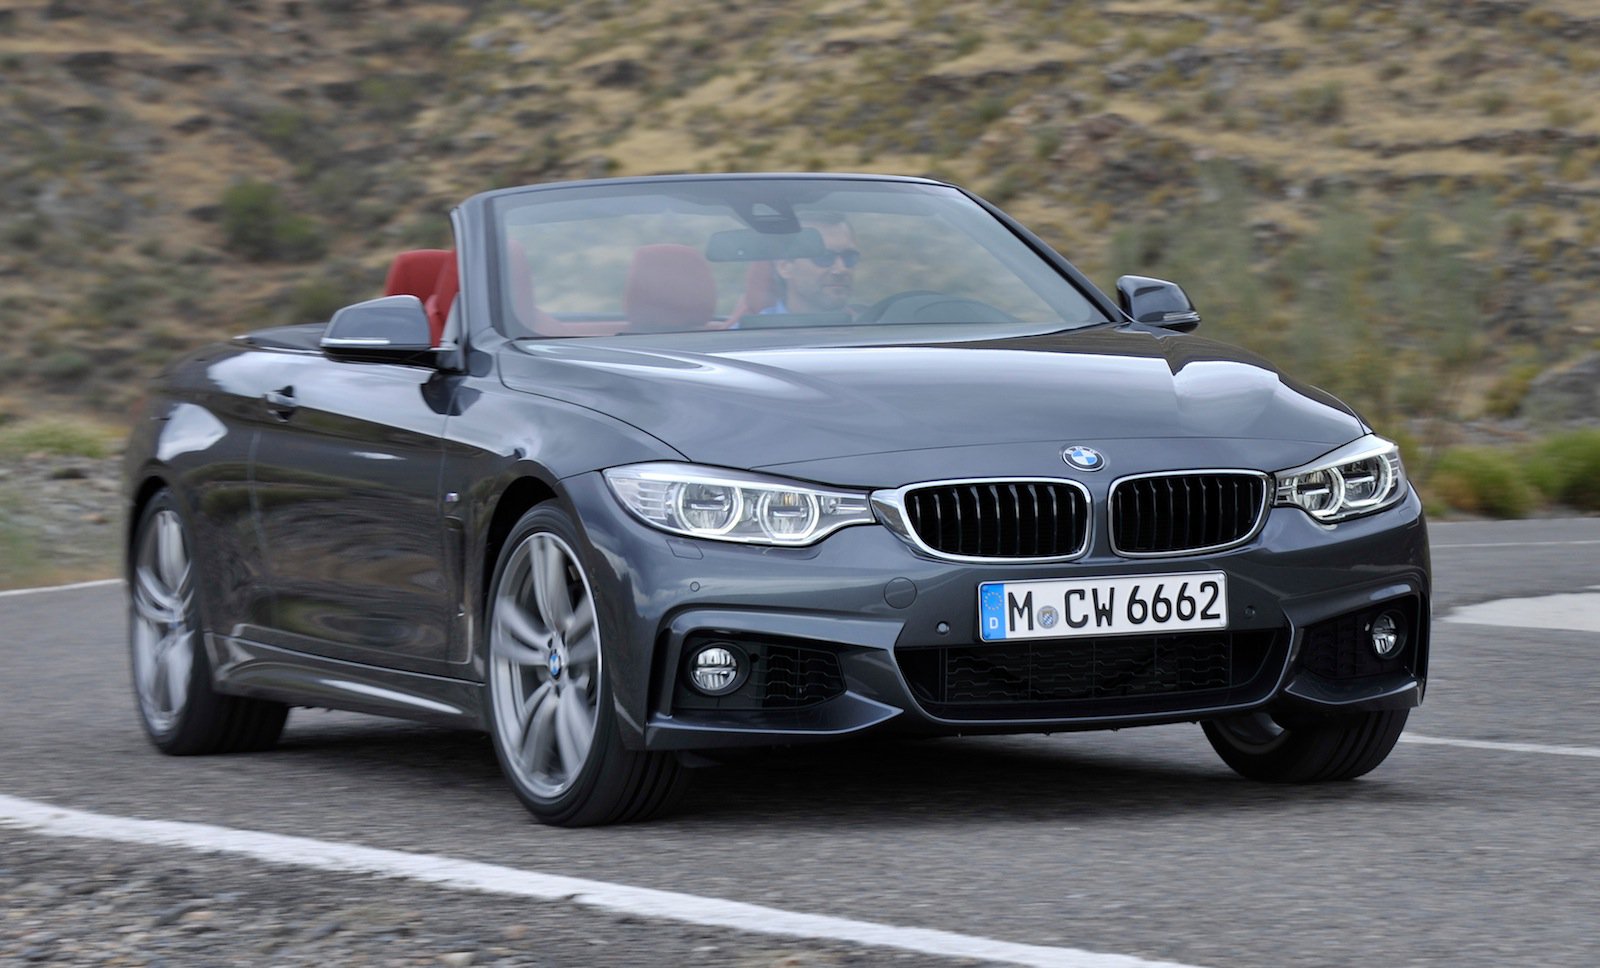 Nice Images Collection: BMW 4 Series Convertible Desktop Wallpapers